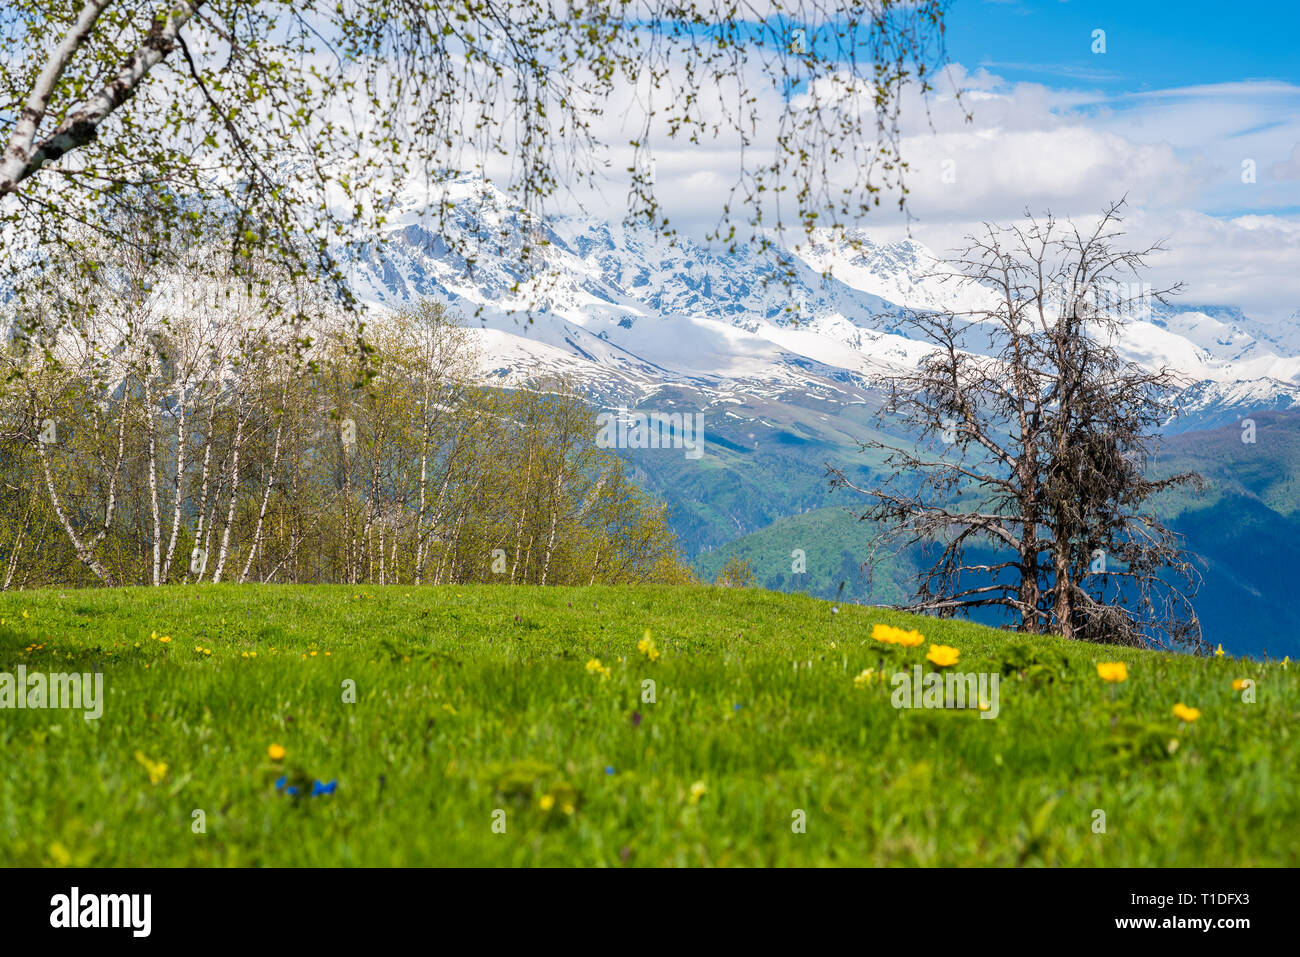 Spring in mountains: a fresh meadow with blossoming flowers & trees with buds blooming against snow mountains. Hatsvali, Svaneti, Georgia in June. Stock Photo